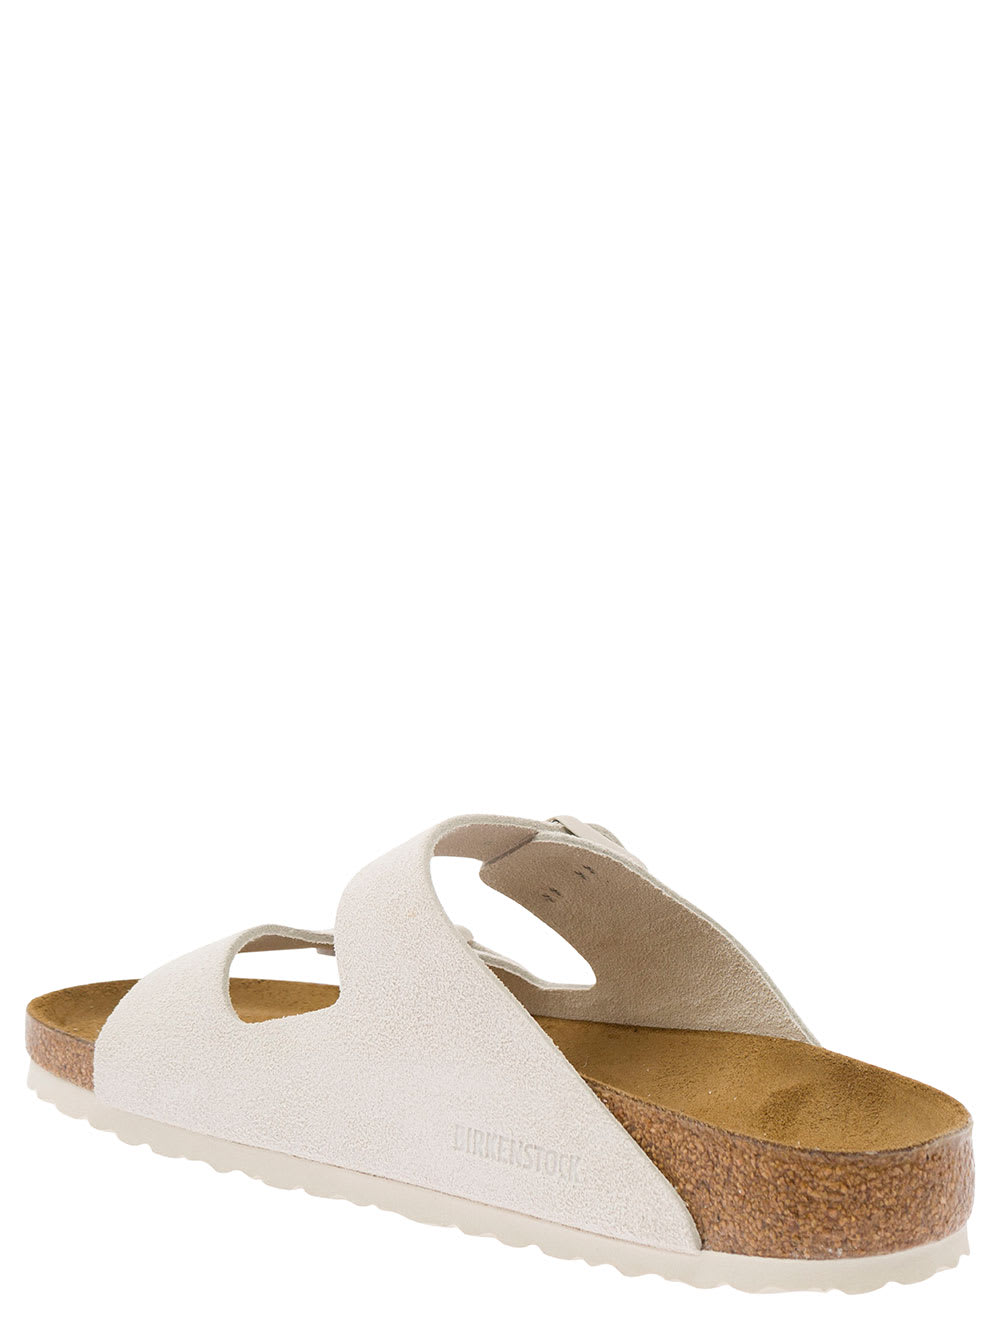 Shop Birkenstock Arizzona Classic Unisex - Authentic Traditionalist/inspired Street Suede In White